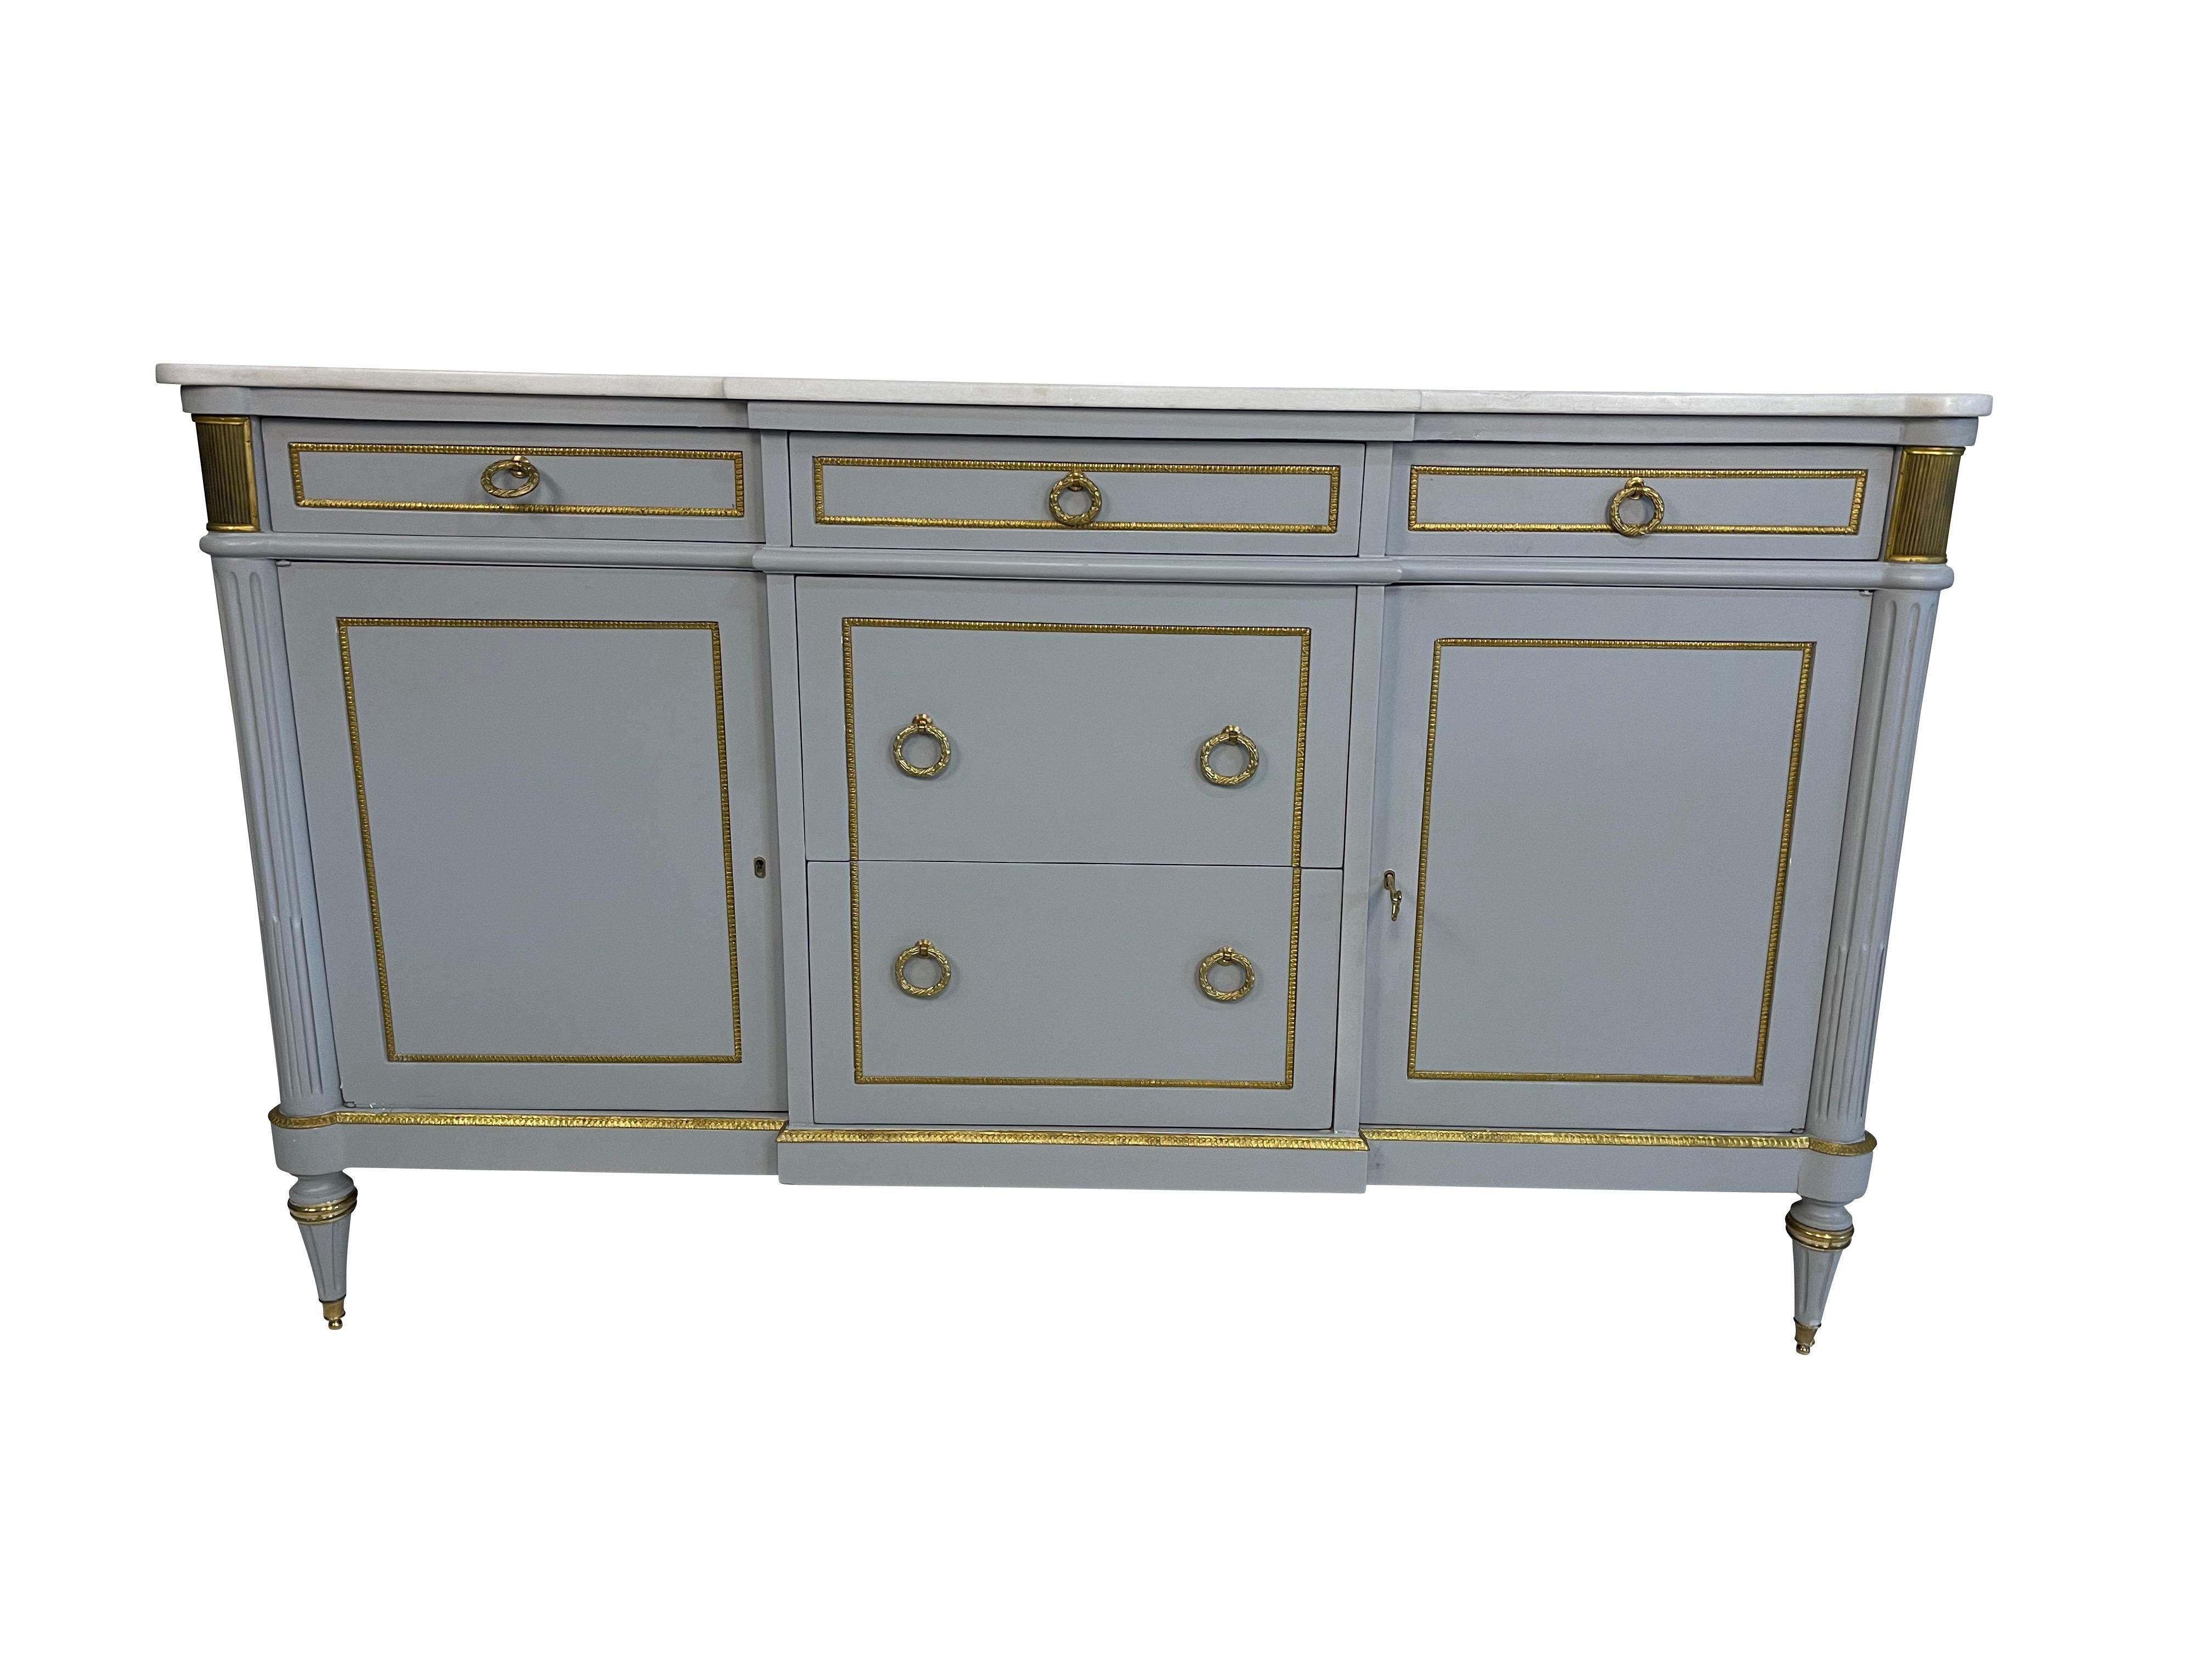 A very handsome 20th-century Louis Philippe enfilade - buffet. Wonderfully constructed from painted wood with two gilt-decorated side doors and three drawers across, over two center drawers with gilt decoration throughout. It is raised on circular